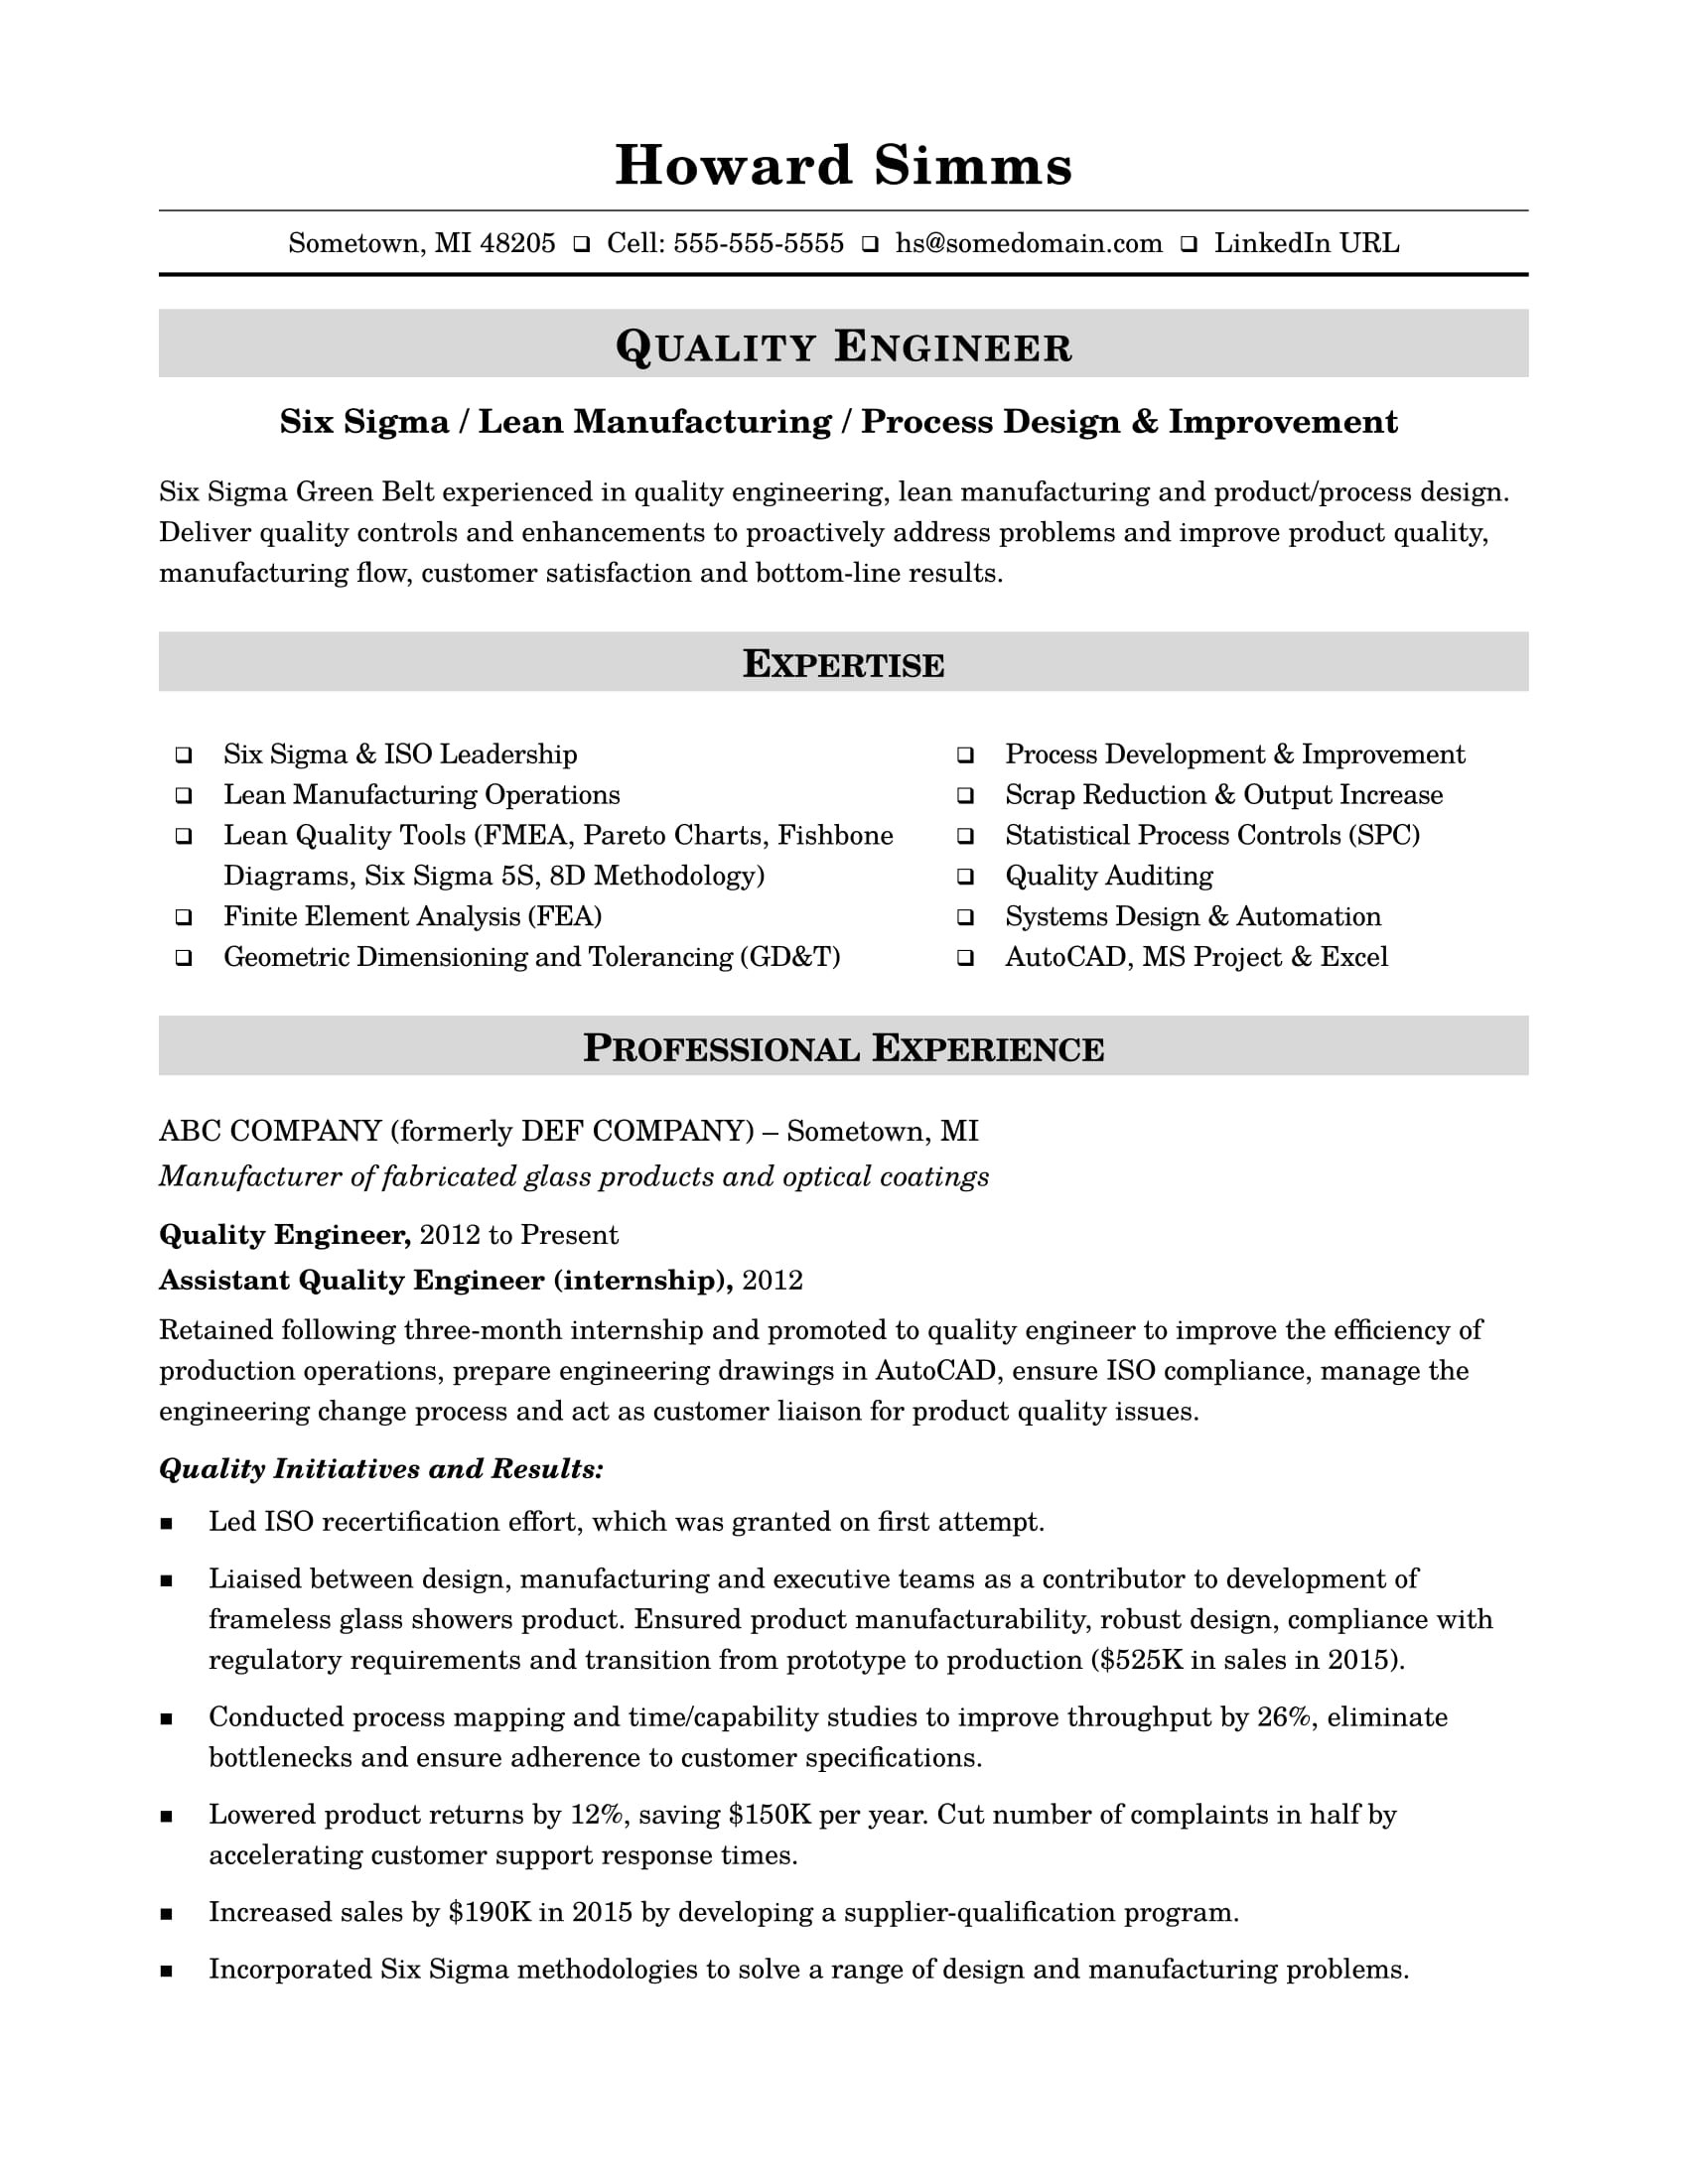 Sample Of A Good Production Resume Sample Resume for A Midlevel Quality Engineer Monster.com